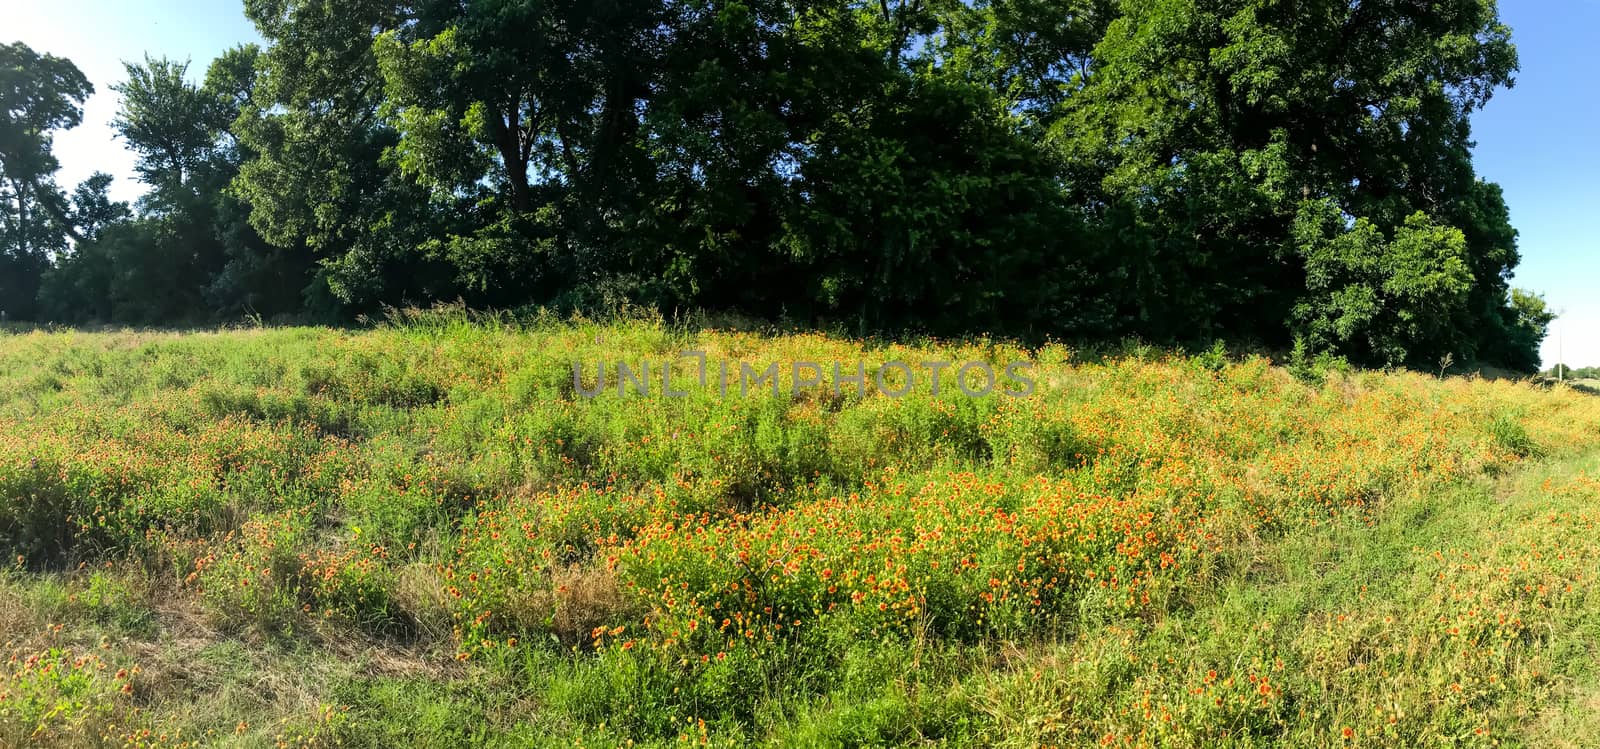 Panoramic view blooming Indian Blanket wildflower field with tall trees at springtime in Coppell, Texas, USA by trongnguyen